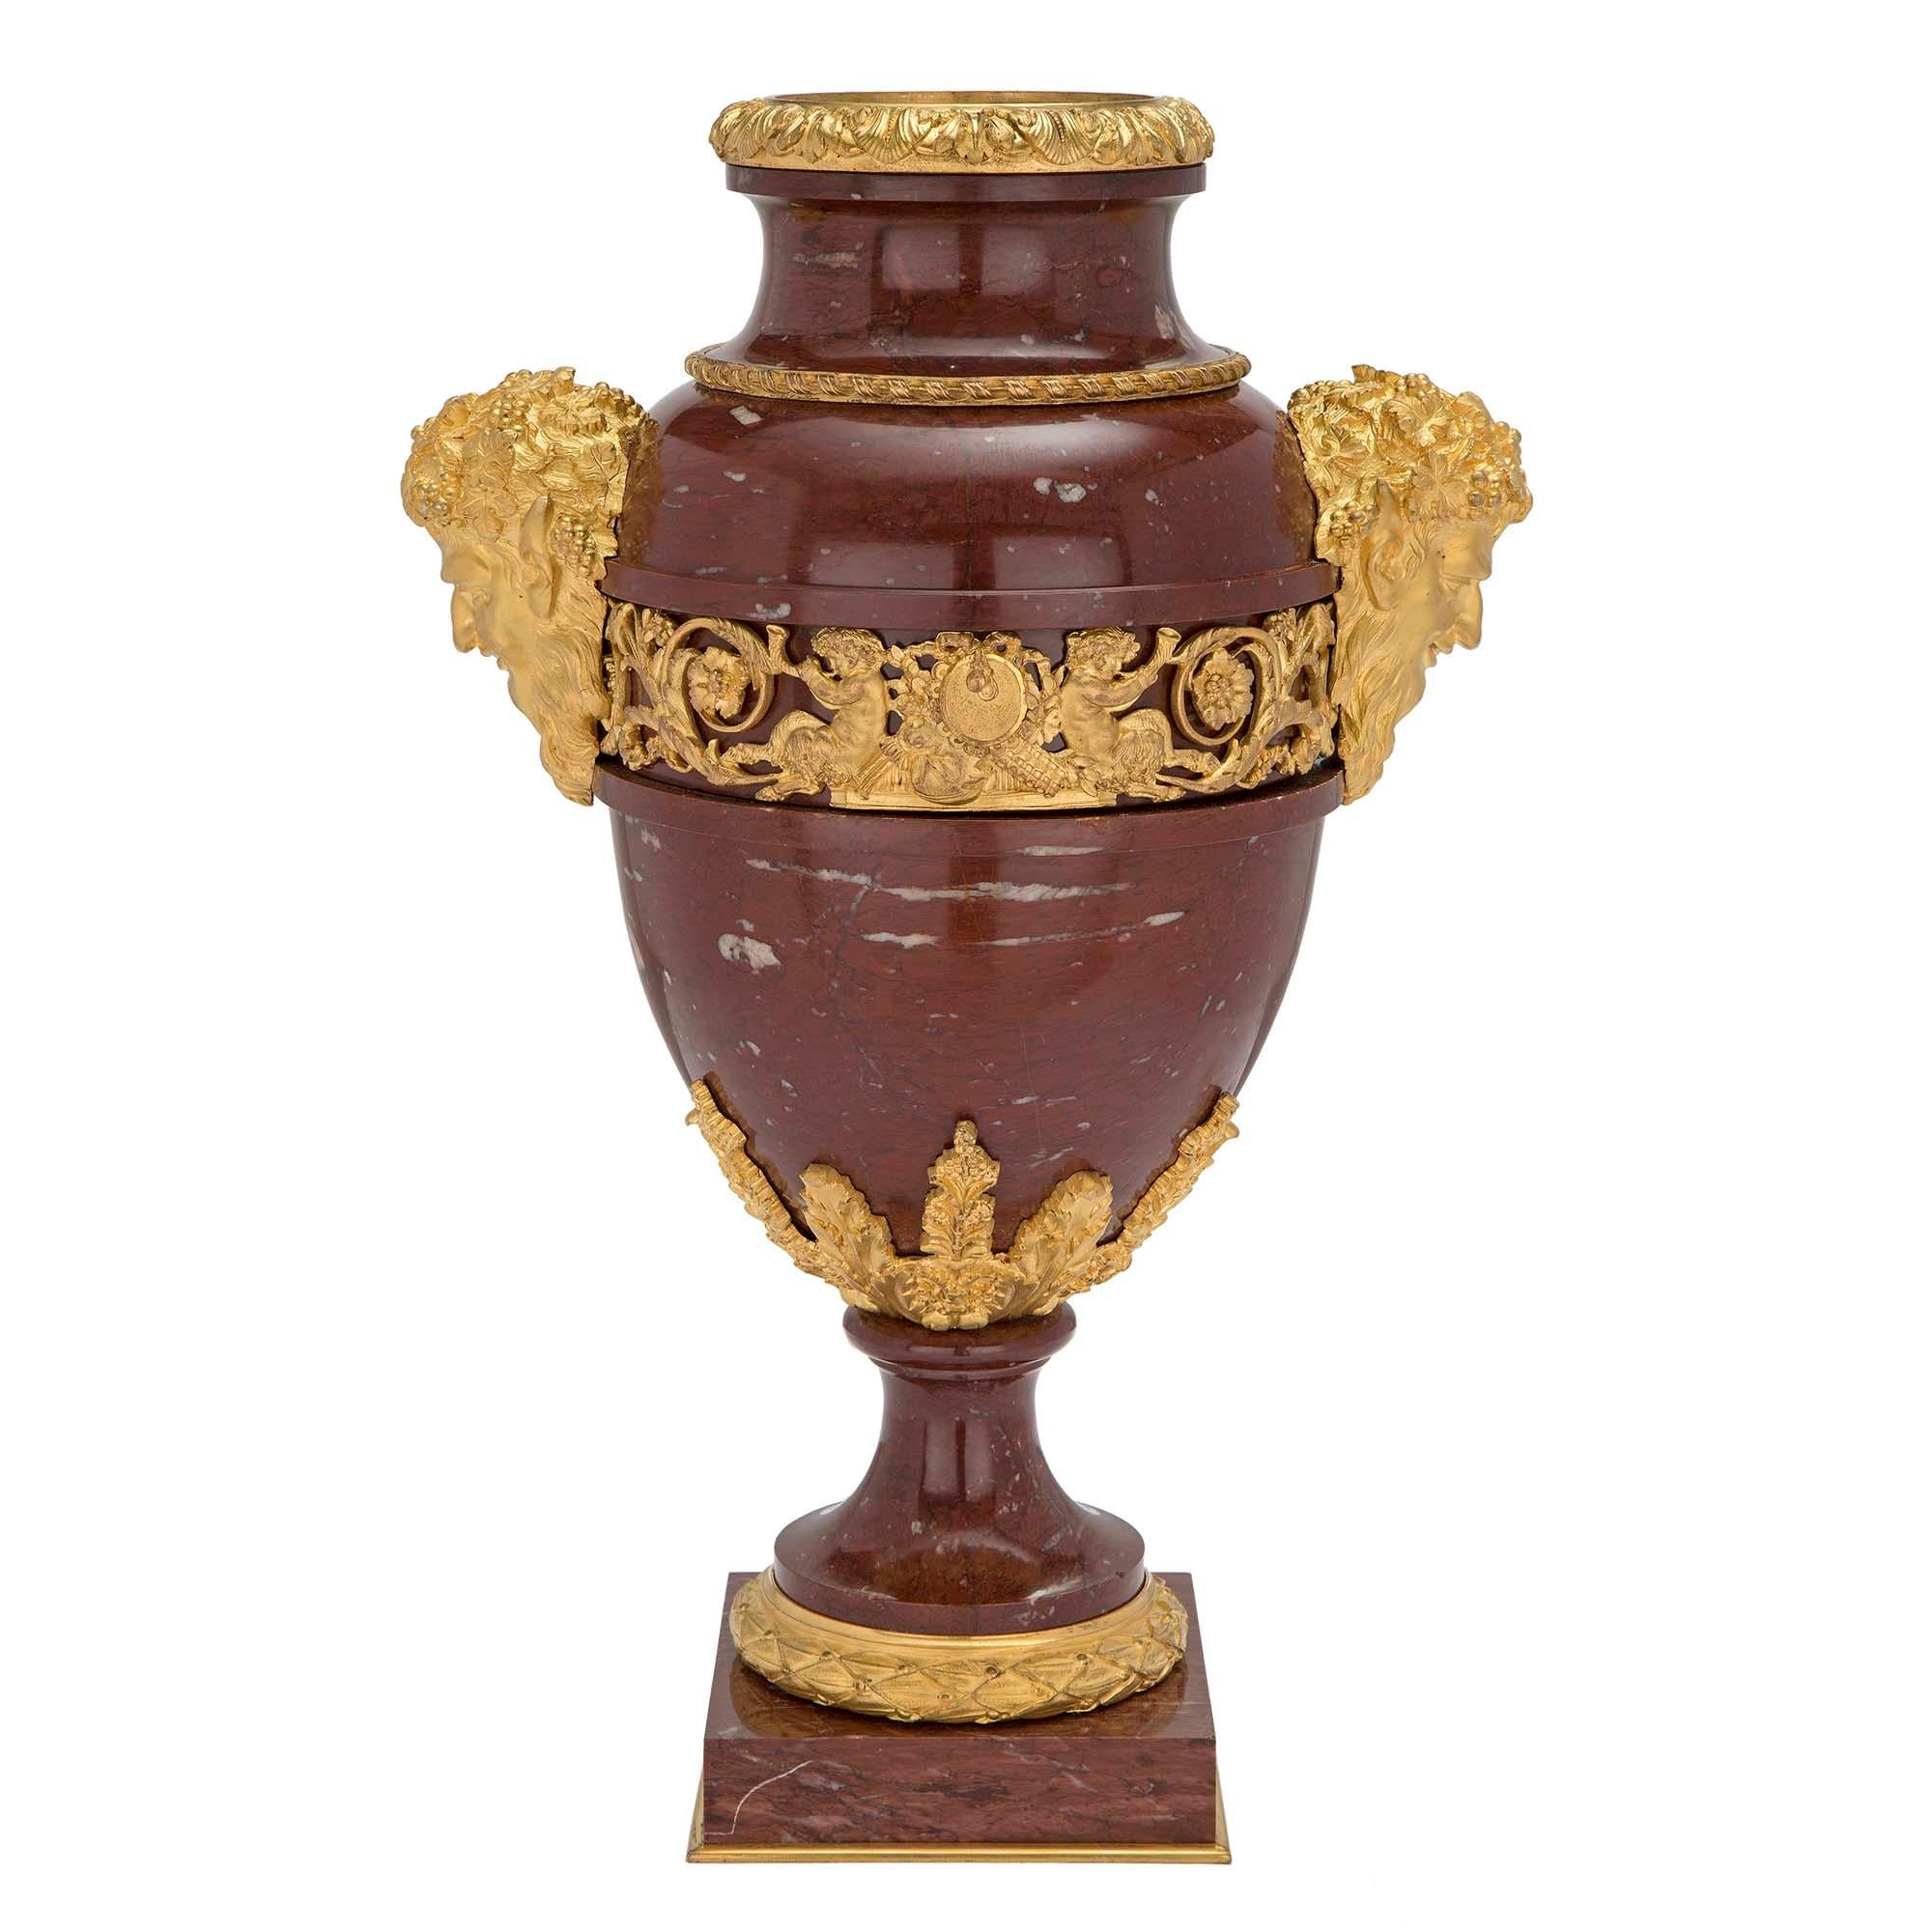 A high quality French 19th century Louis XVI st. Rouge Grotto marble and ormolu vase. The urn is raised by a square base with a decorative ormolu band below a fine berried laurel ormolu band and marble socle pedestals. The body displays rich foliate